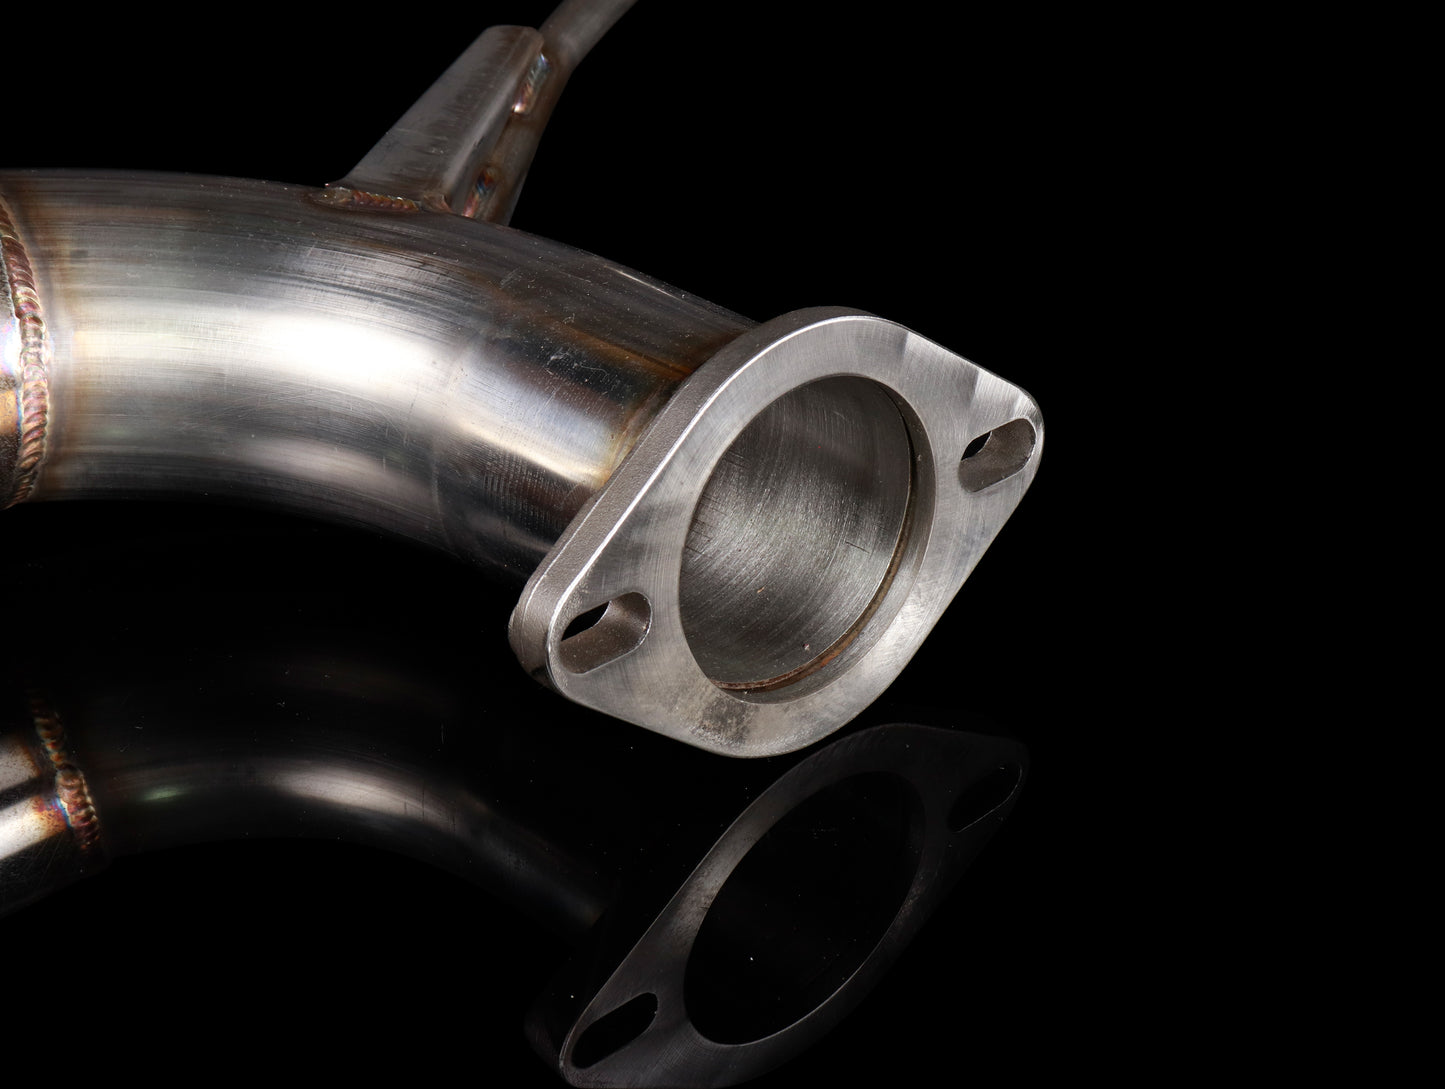 EVS Tuning 70-SSP Exhaust System - 00-09 S2000